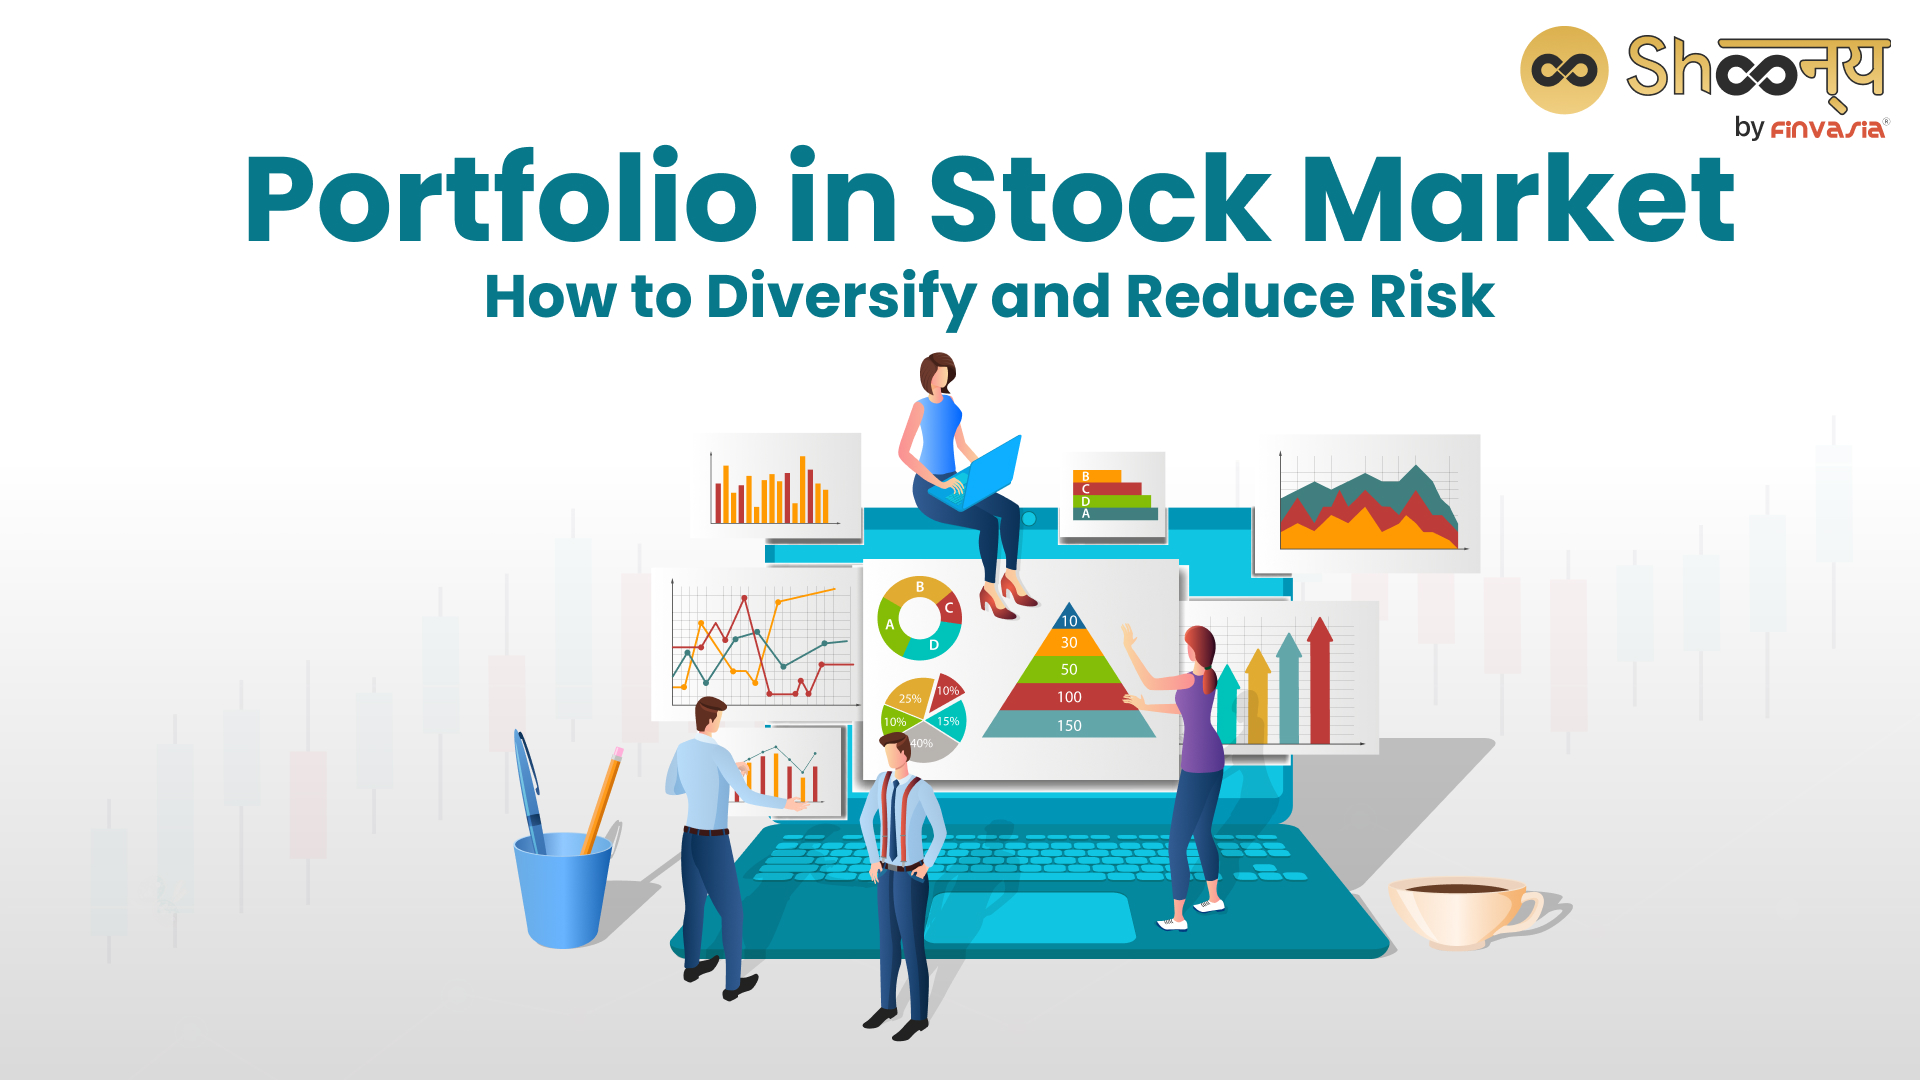 Portfolio in the Stock Market: What It Is and How You Can Create It